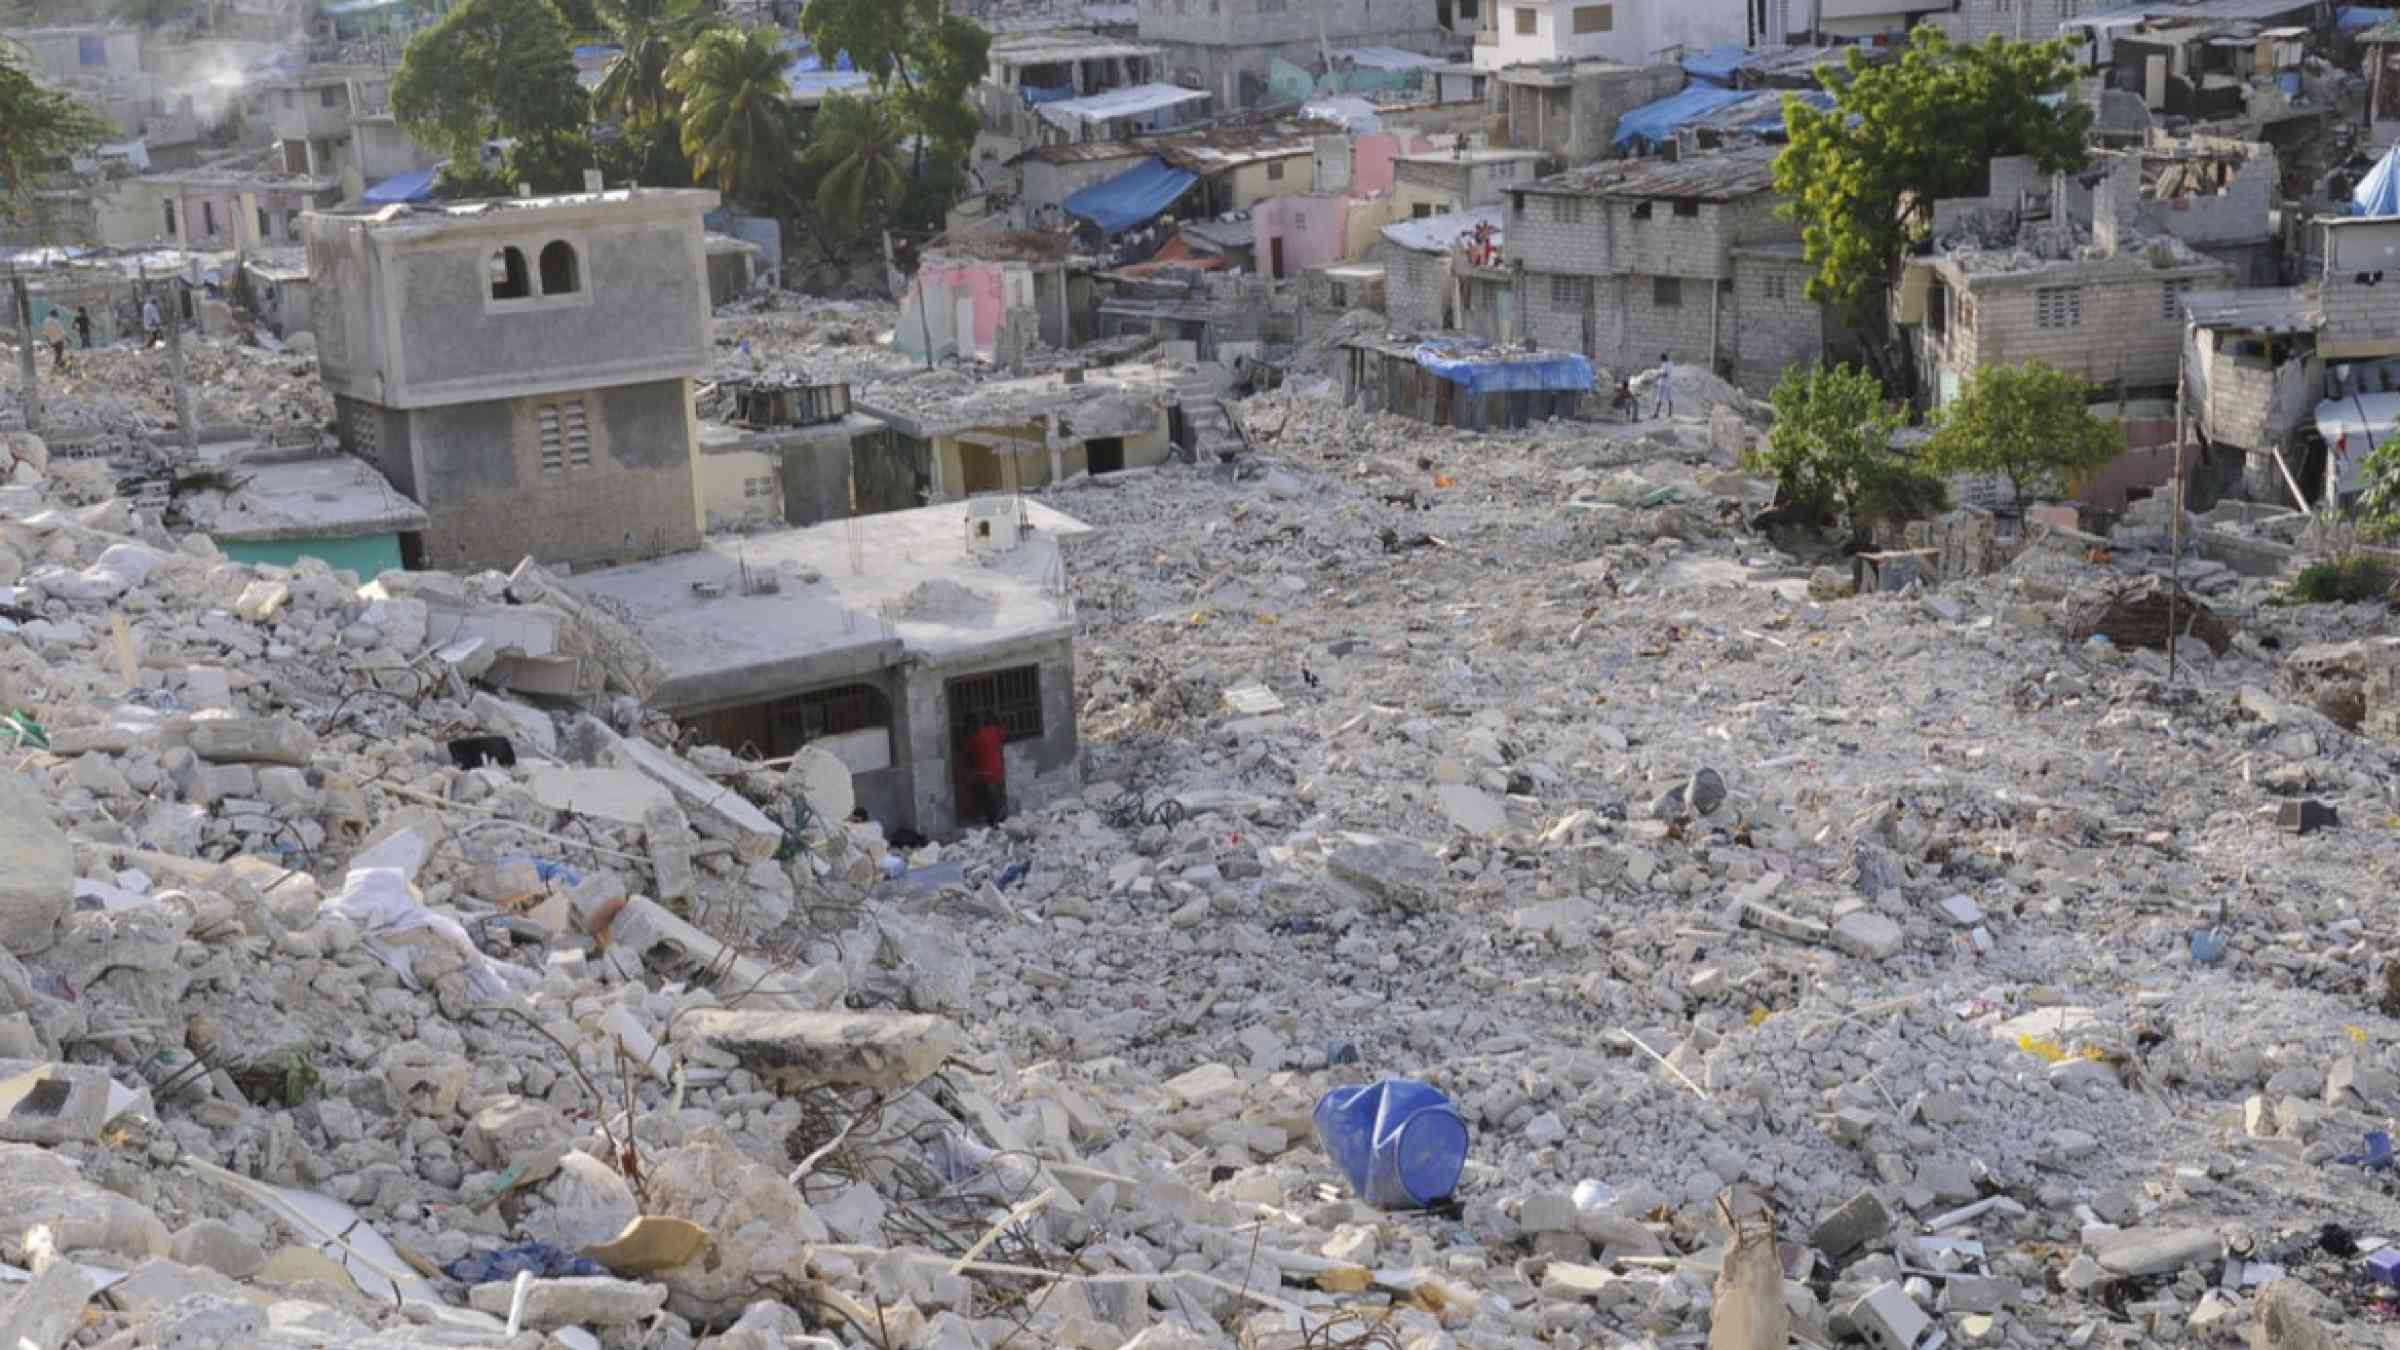  A valley of broken houses and debris following the 2010 earthquake in Port-Au-prince, Haiti.